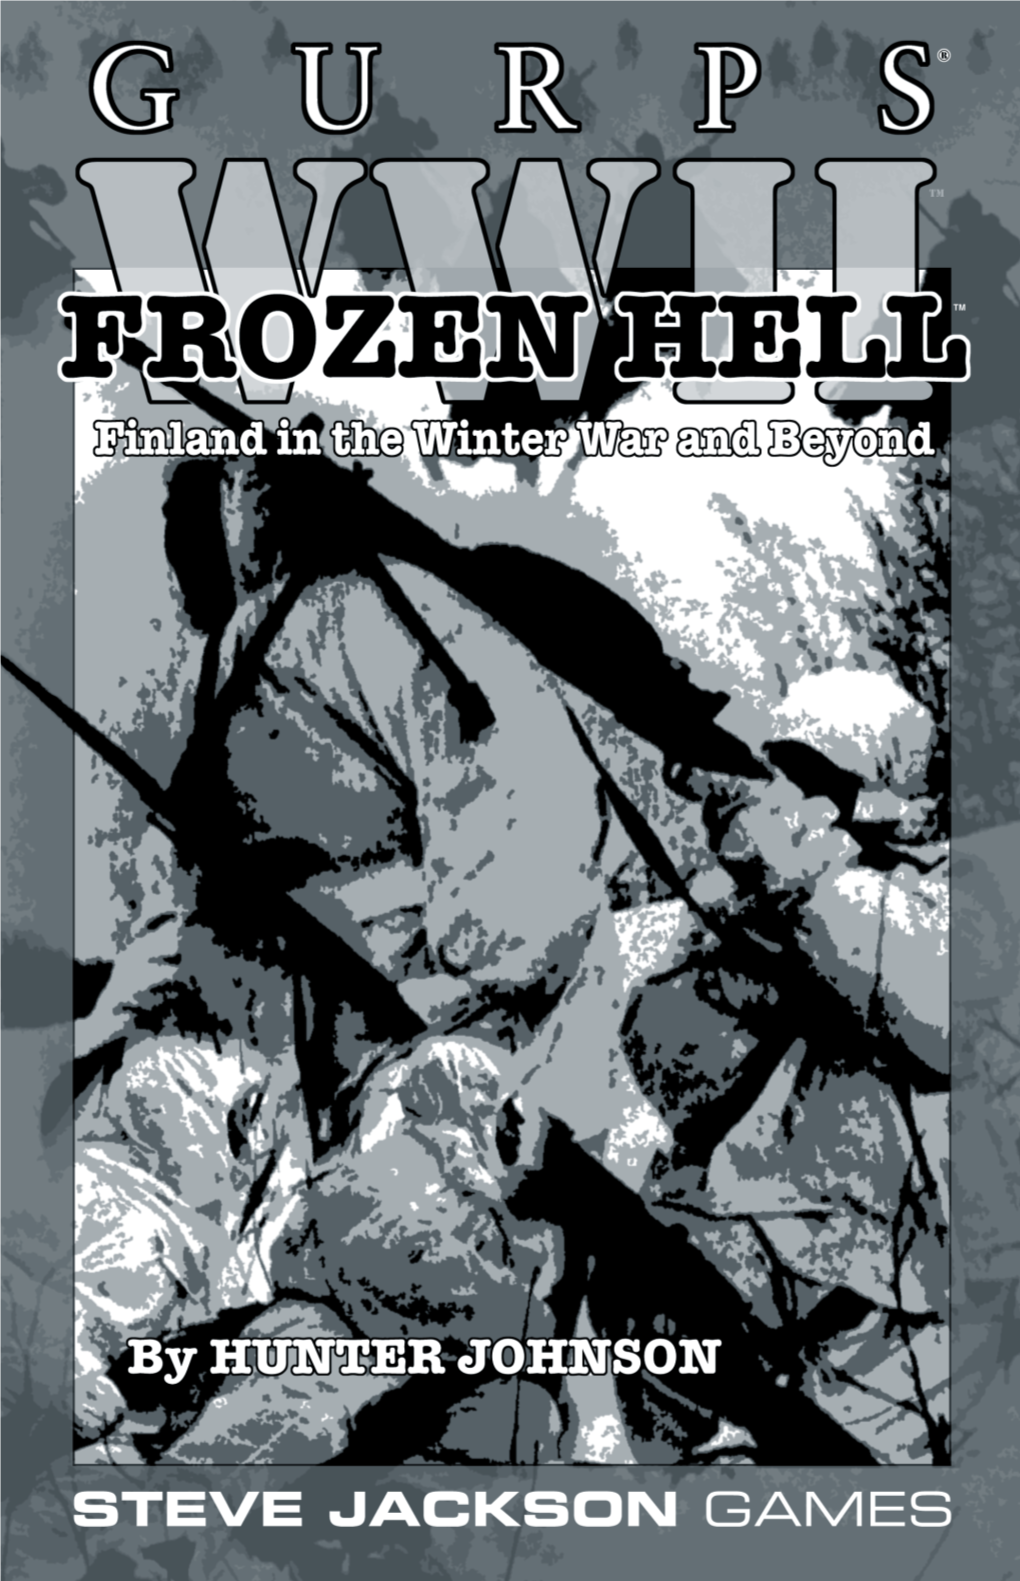 Frozen Hell, Pyramid, and Map of Finland